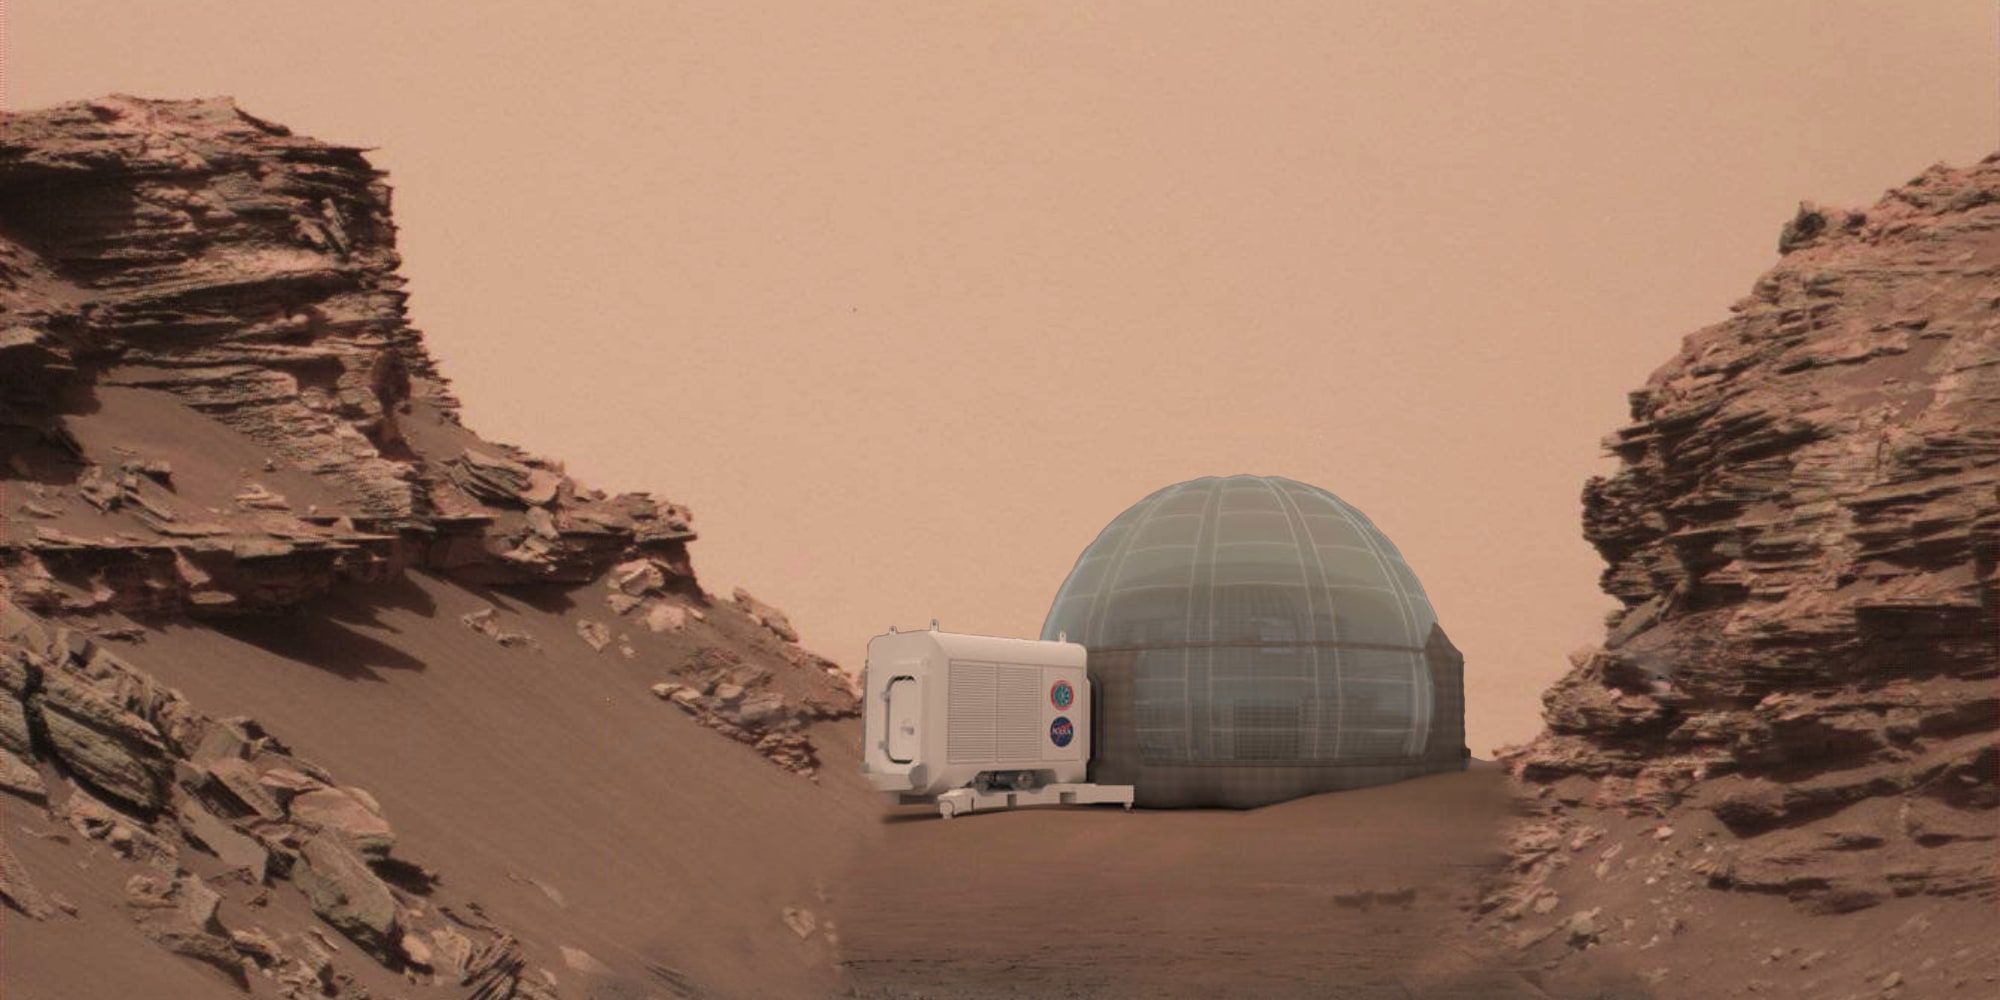 Finding A Home For Humans On Mars